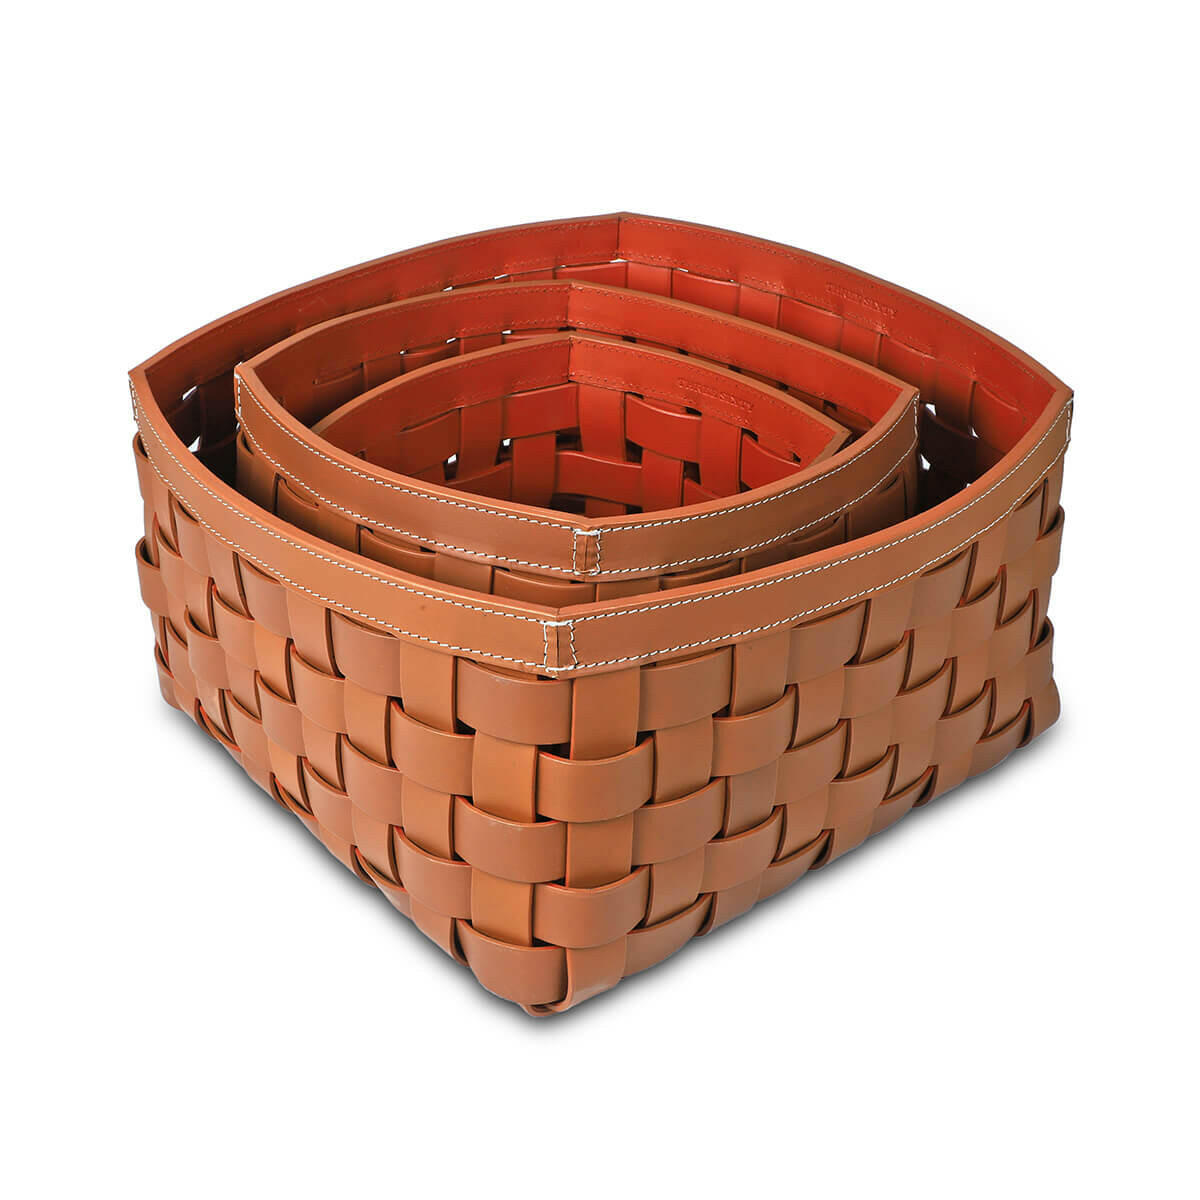 Recycled Woven Leather Baskets Set of 3 in Cognac by Quince